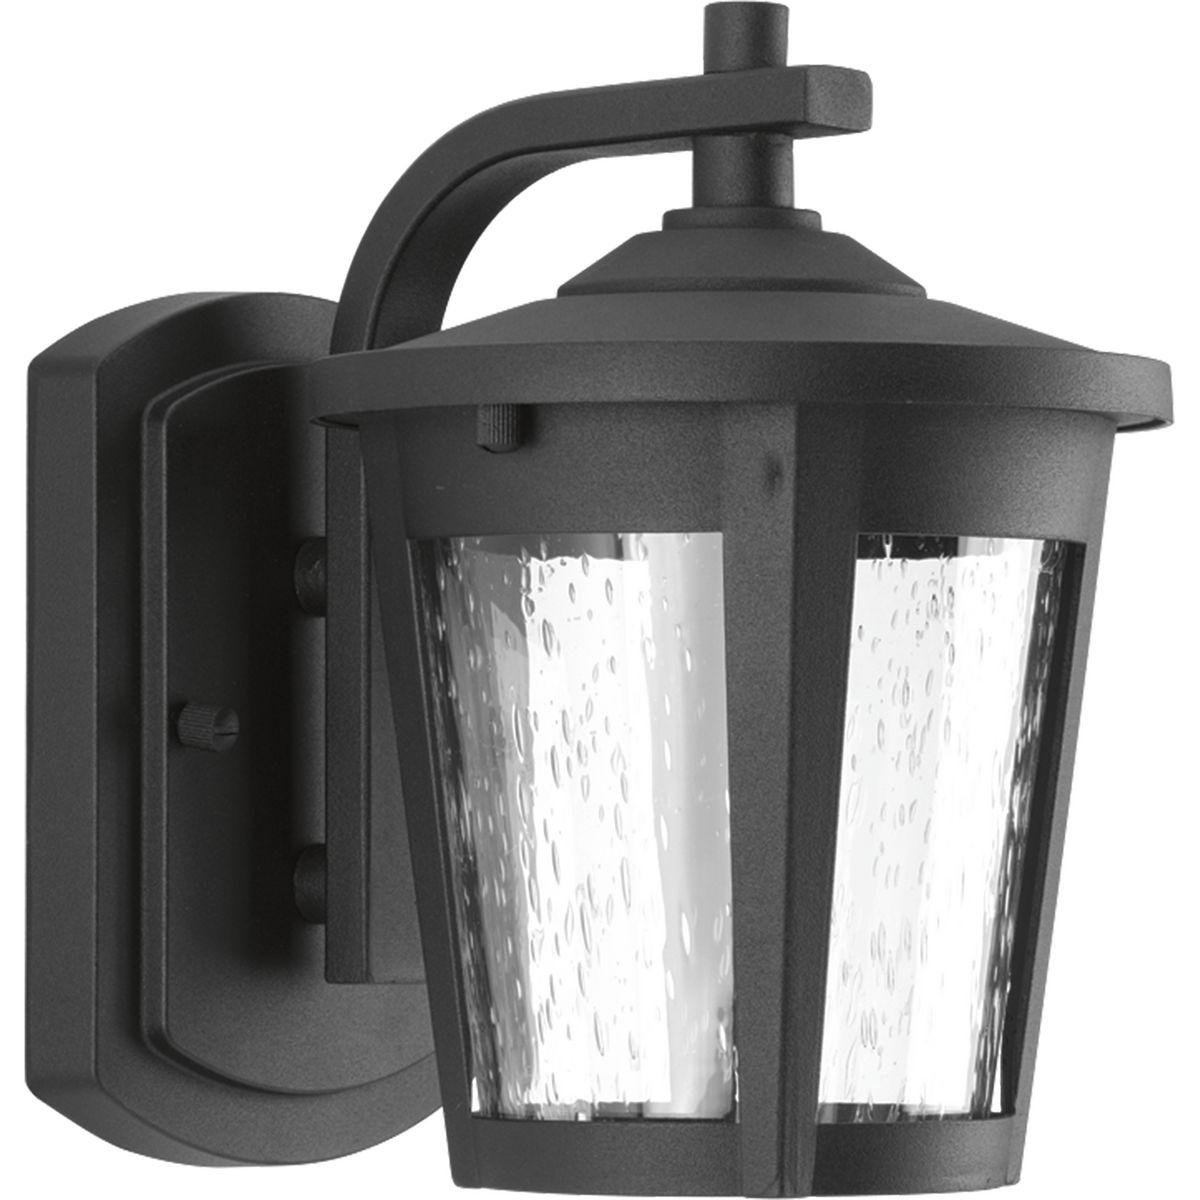 Hubbell P6077-3130K9 Small LED Wall lantern with contemporary styling and clear seeded glass. 120V AC replaceable LED module, 623 lumens (source), 3000K color temperature and 90+ CRI.  ; Contemporary styling. ; Features clear seeded glass. ; Powder coated finish. ; Meets Cali